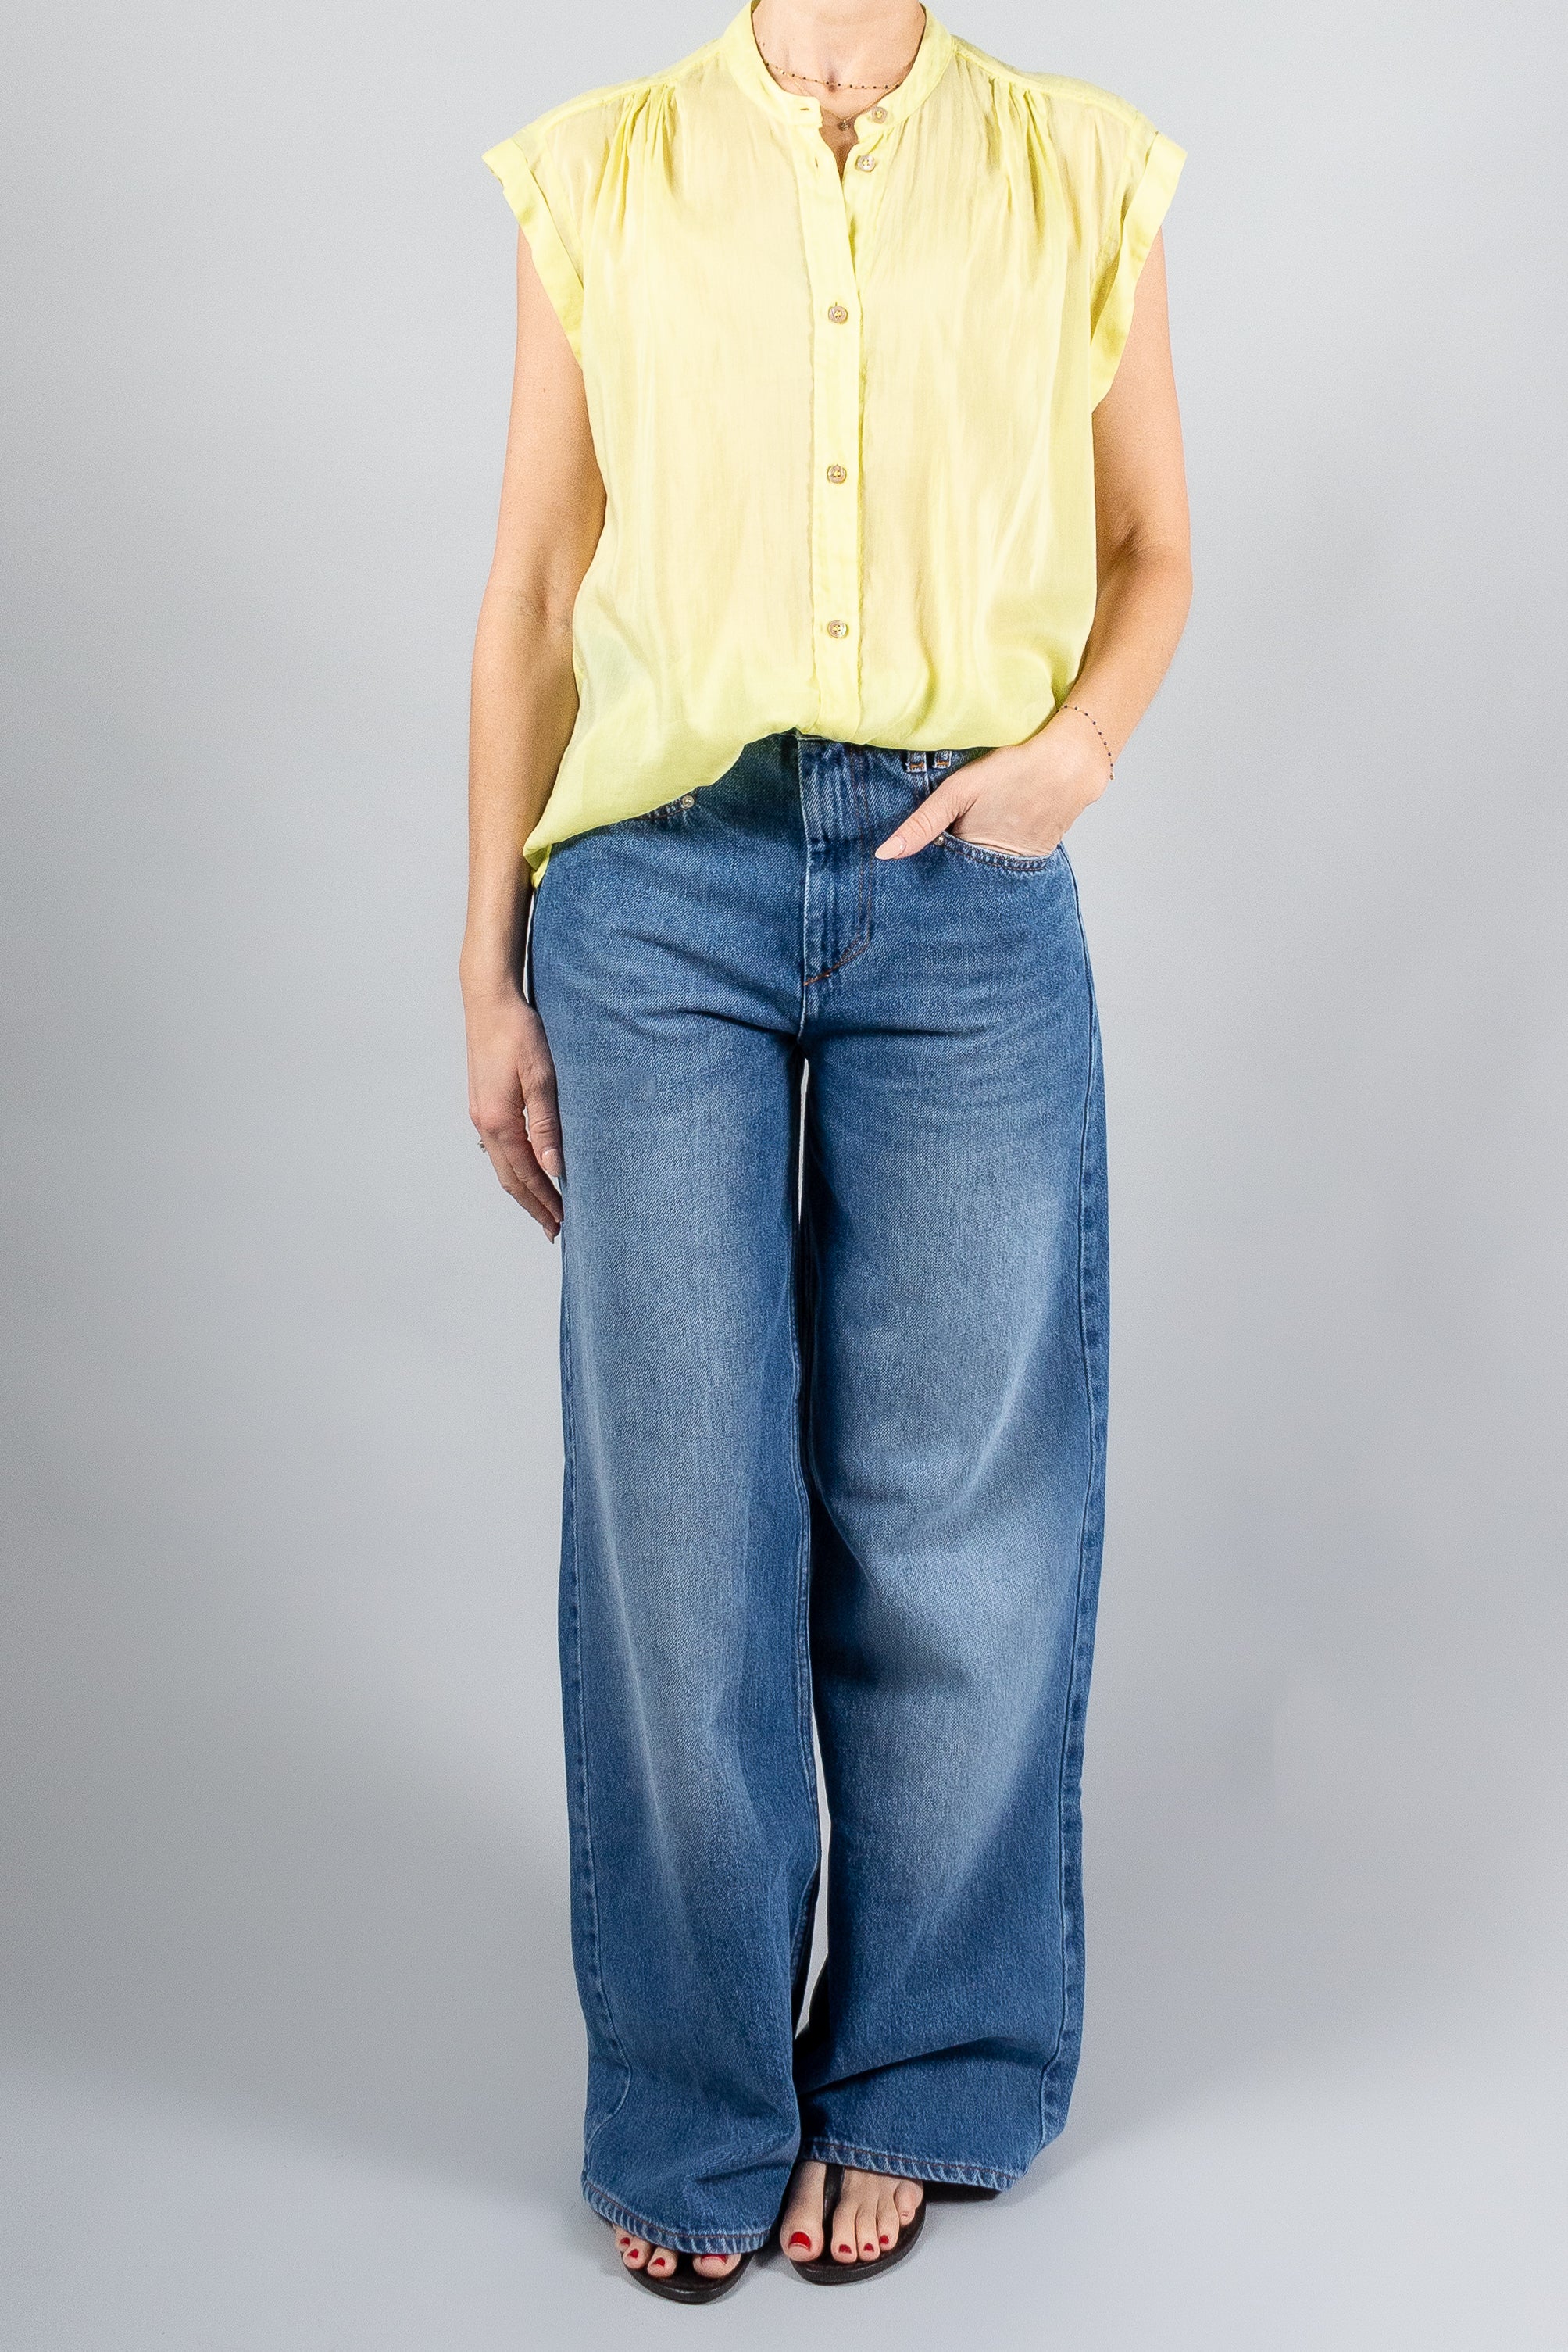 Forte Forte Cotton Silk Voile Short Sleeved Top-Tops-Misch-Boutique-Vancouver-Canada-misch.ca